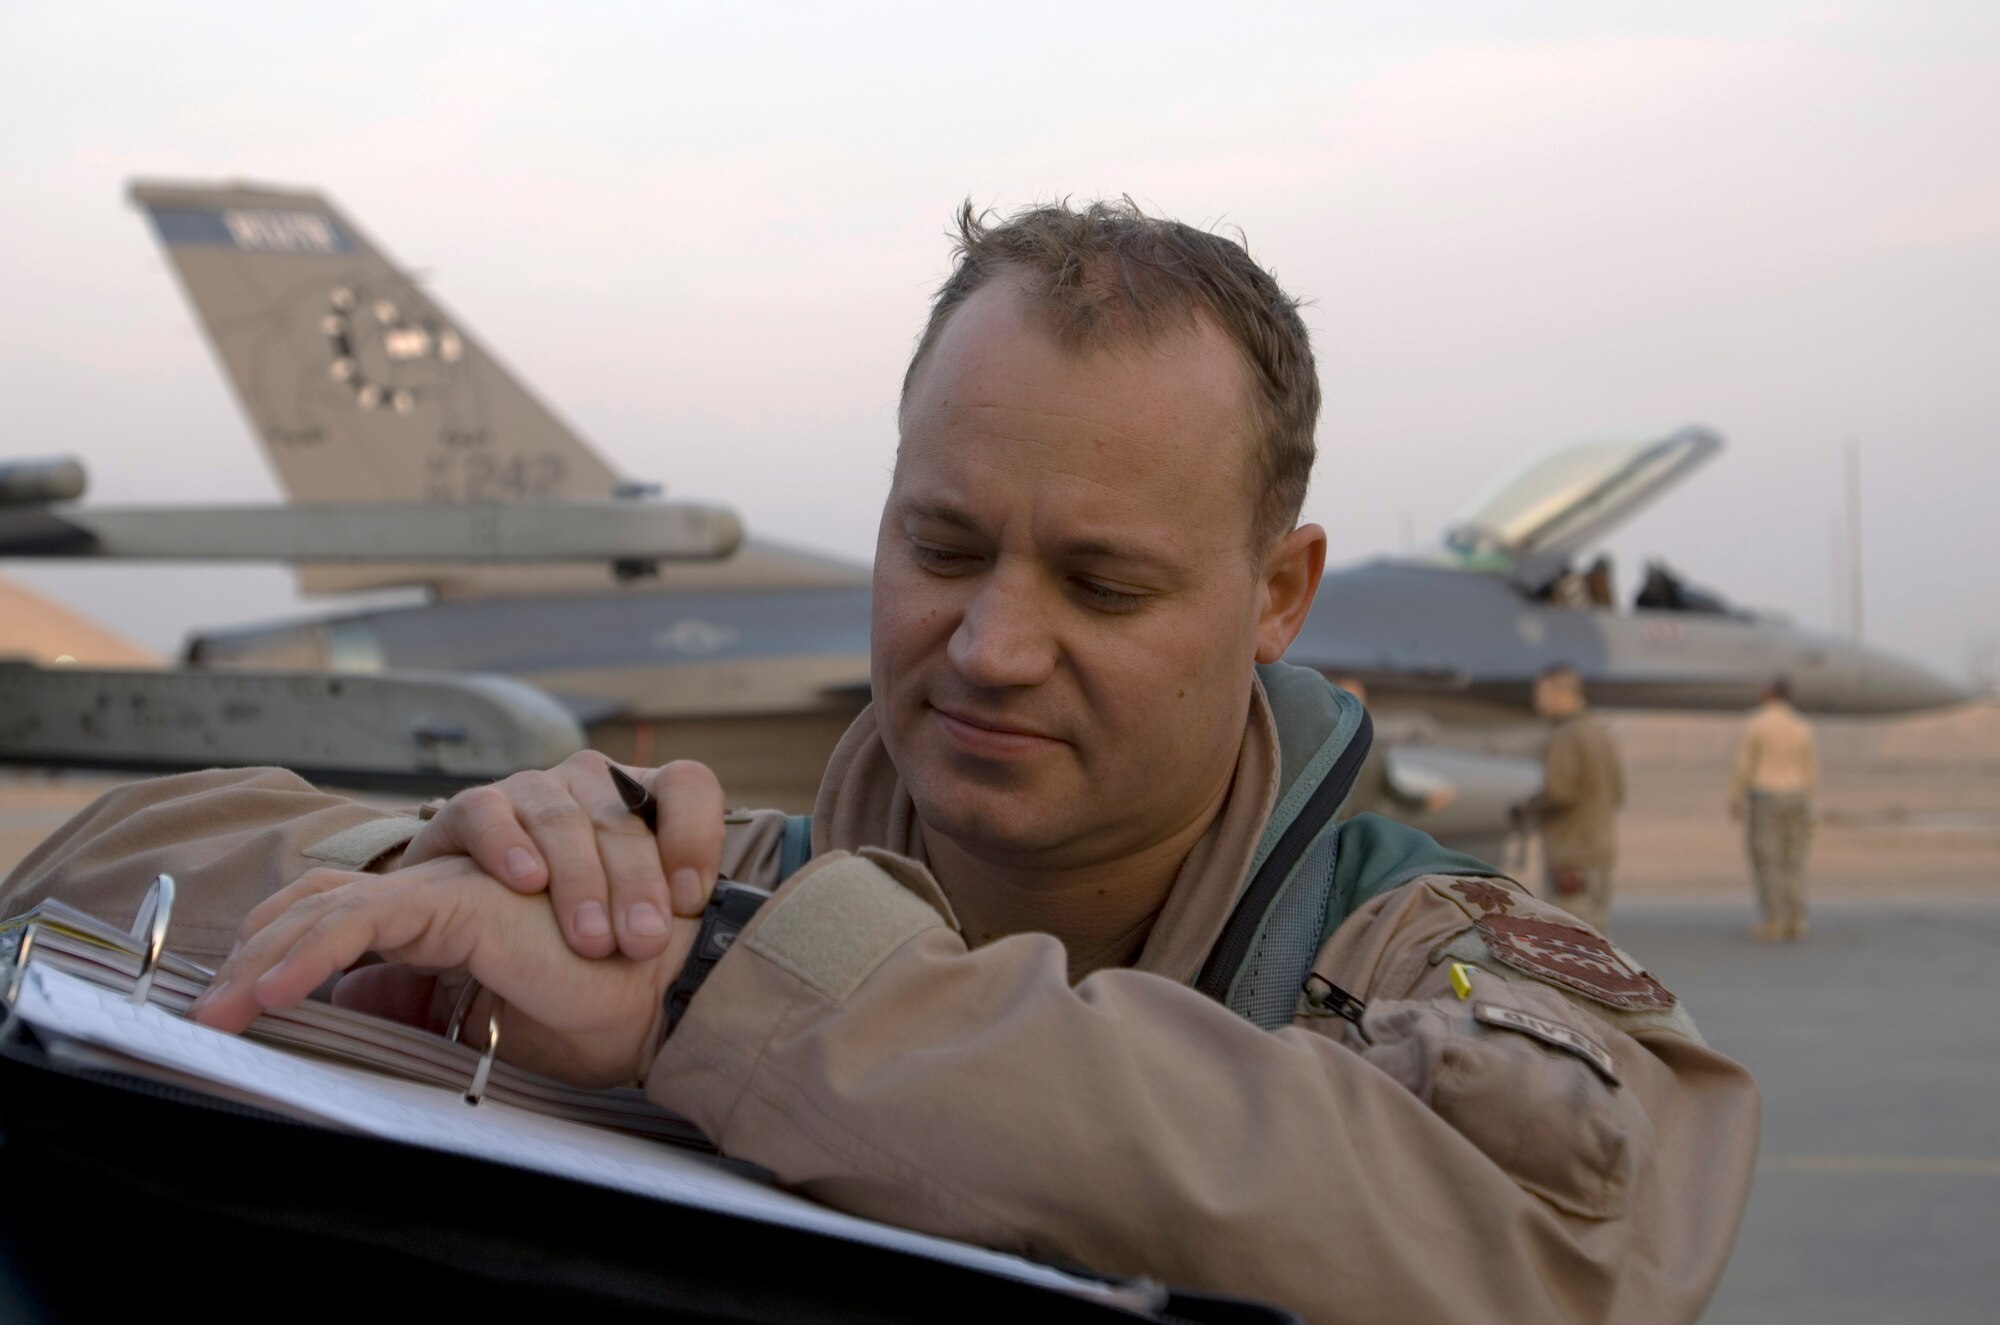 Maj. Curt Grayson fills out paperwork shortly after landing at Joint Base Balad, Iraq, Dec. 10. Grayson's home unit, the Minnesota Air National Guard's 179th Fighter Squadron, will carry the 332nd Expeditionary Fighter Squadron designation while deployed. Grayson, an F-16 Fighting Falcon pilot, is a native of Esco, Minn. (U.S. Air Force photo/Tech. Sgt. Erik Gudmundson)